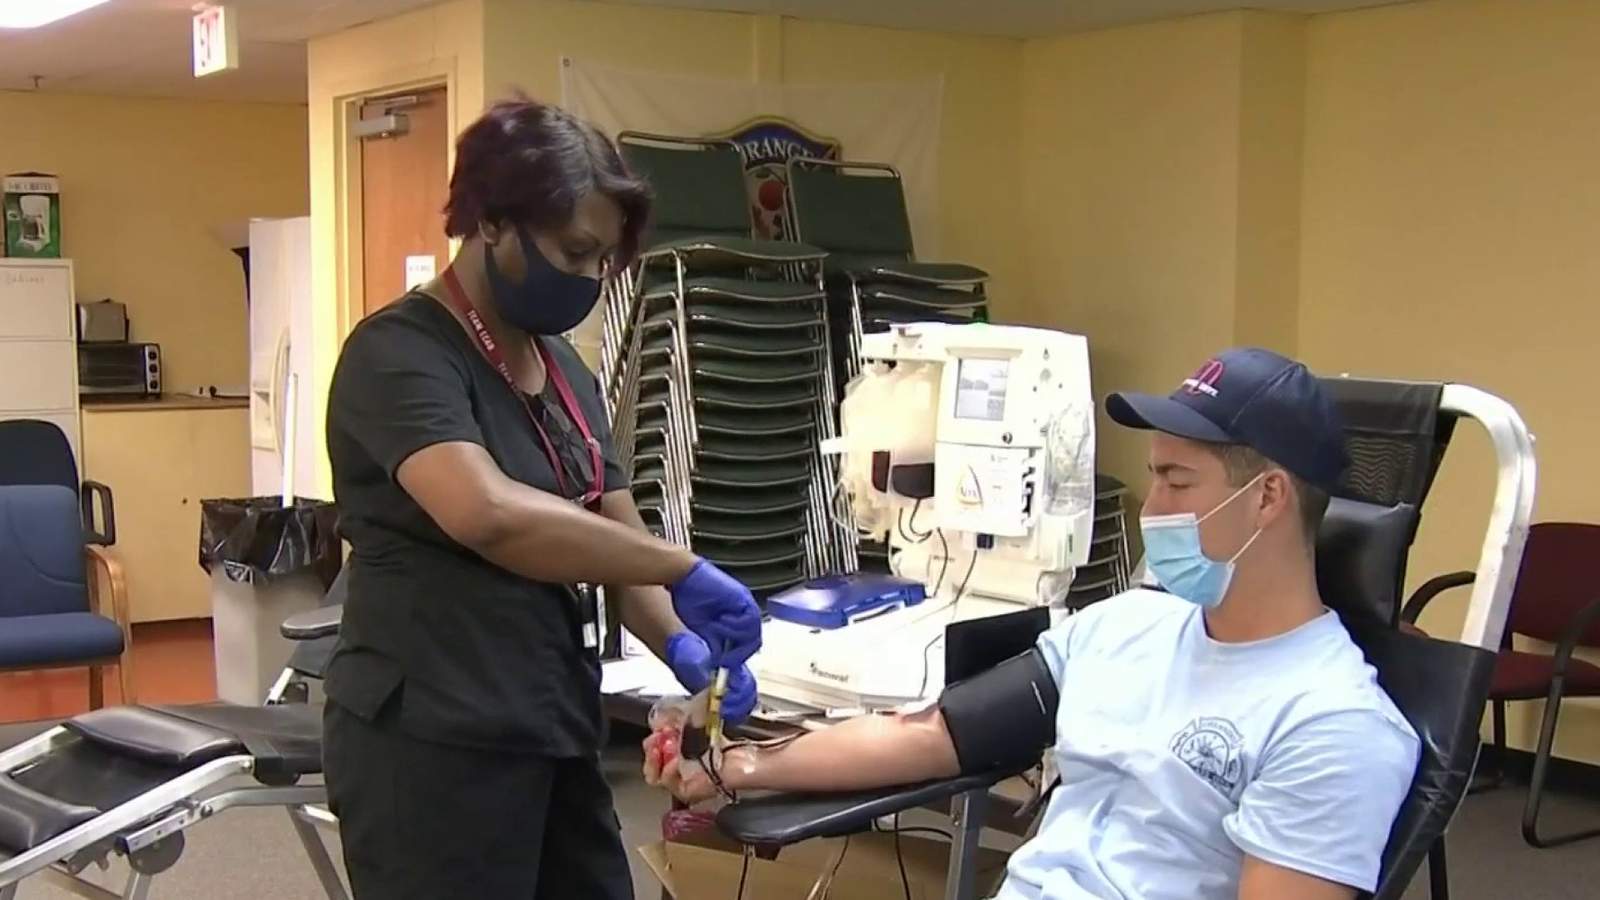 After recovering from COVID-19, Orlando firefighters donate plasma to help others